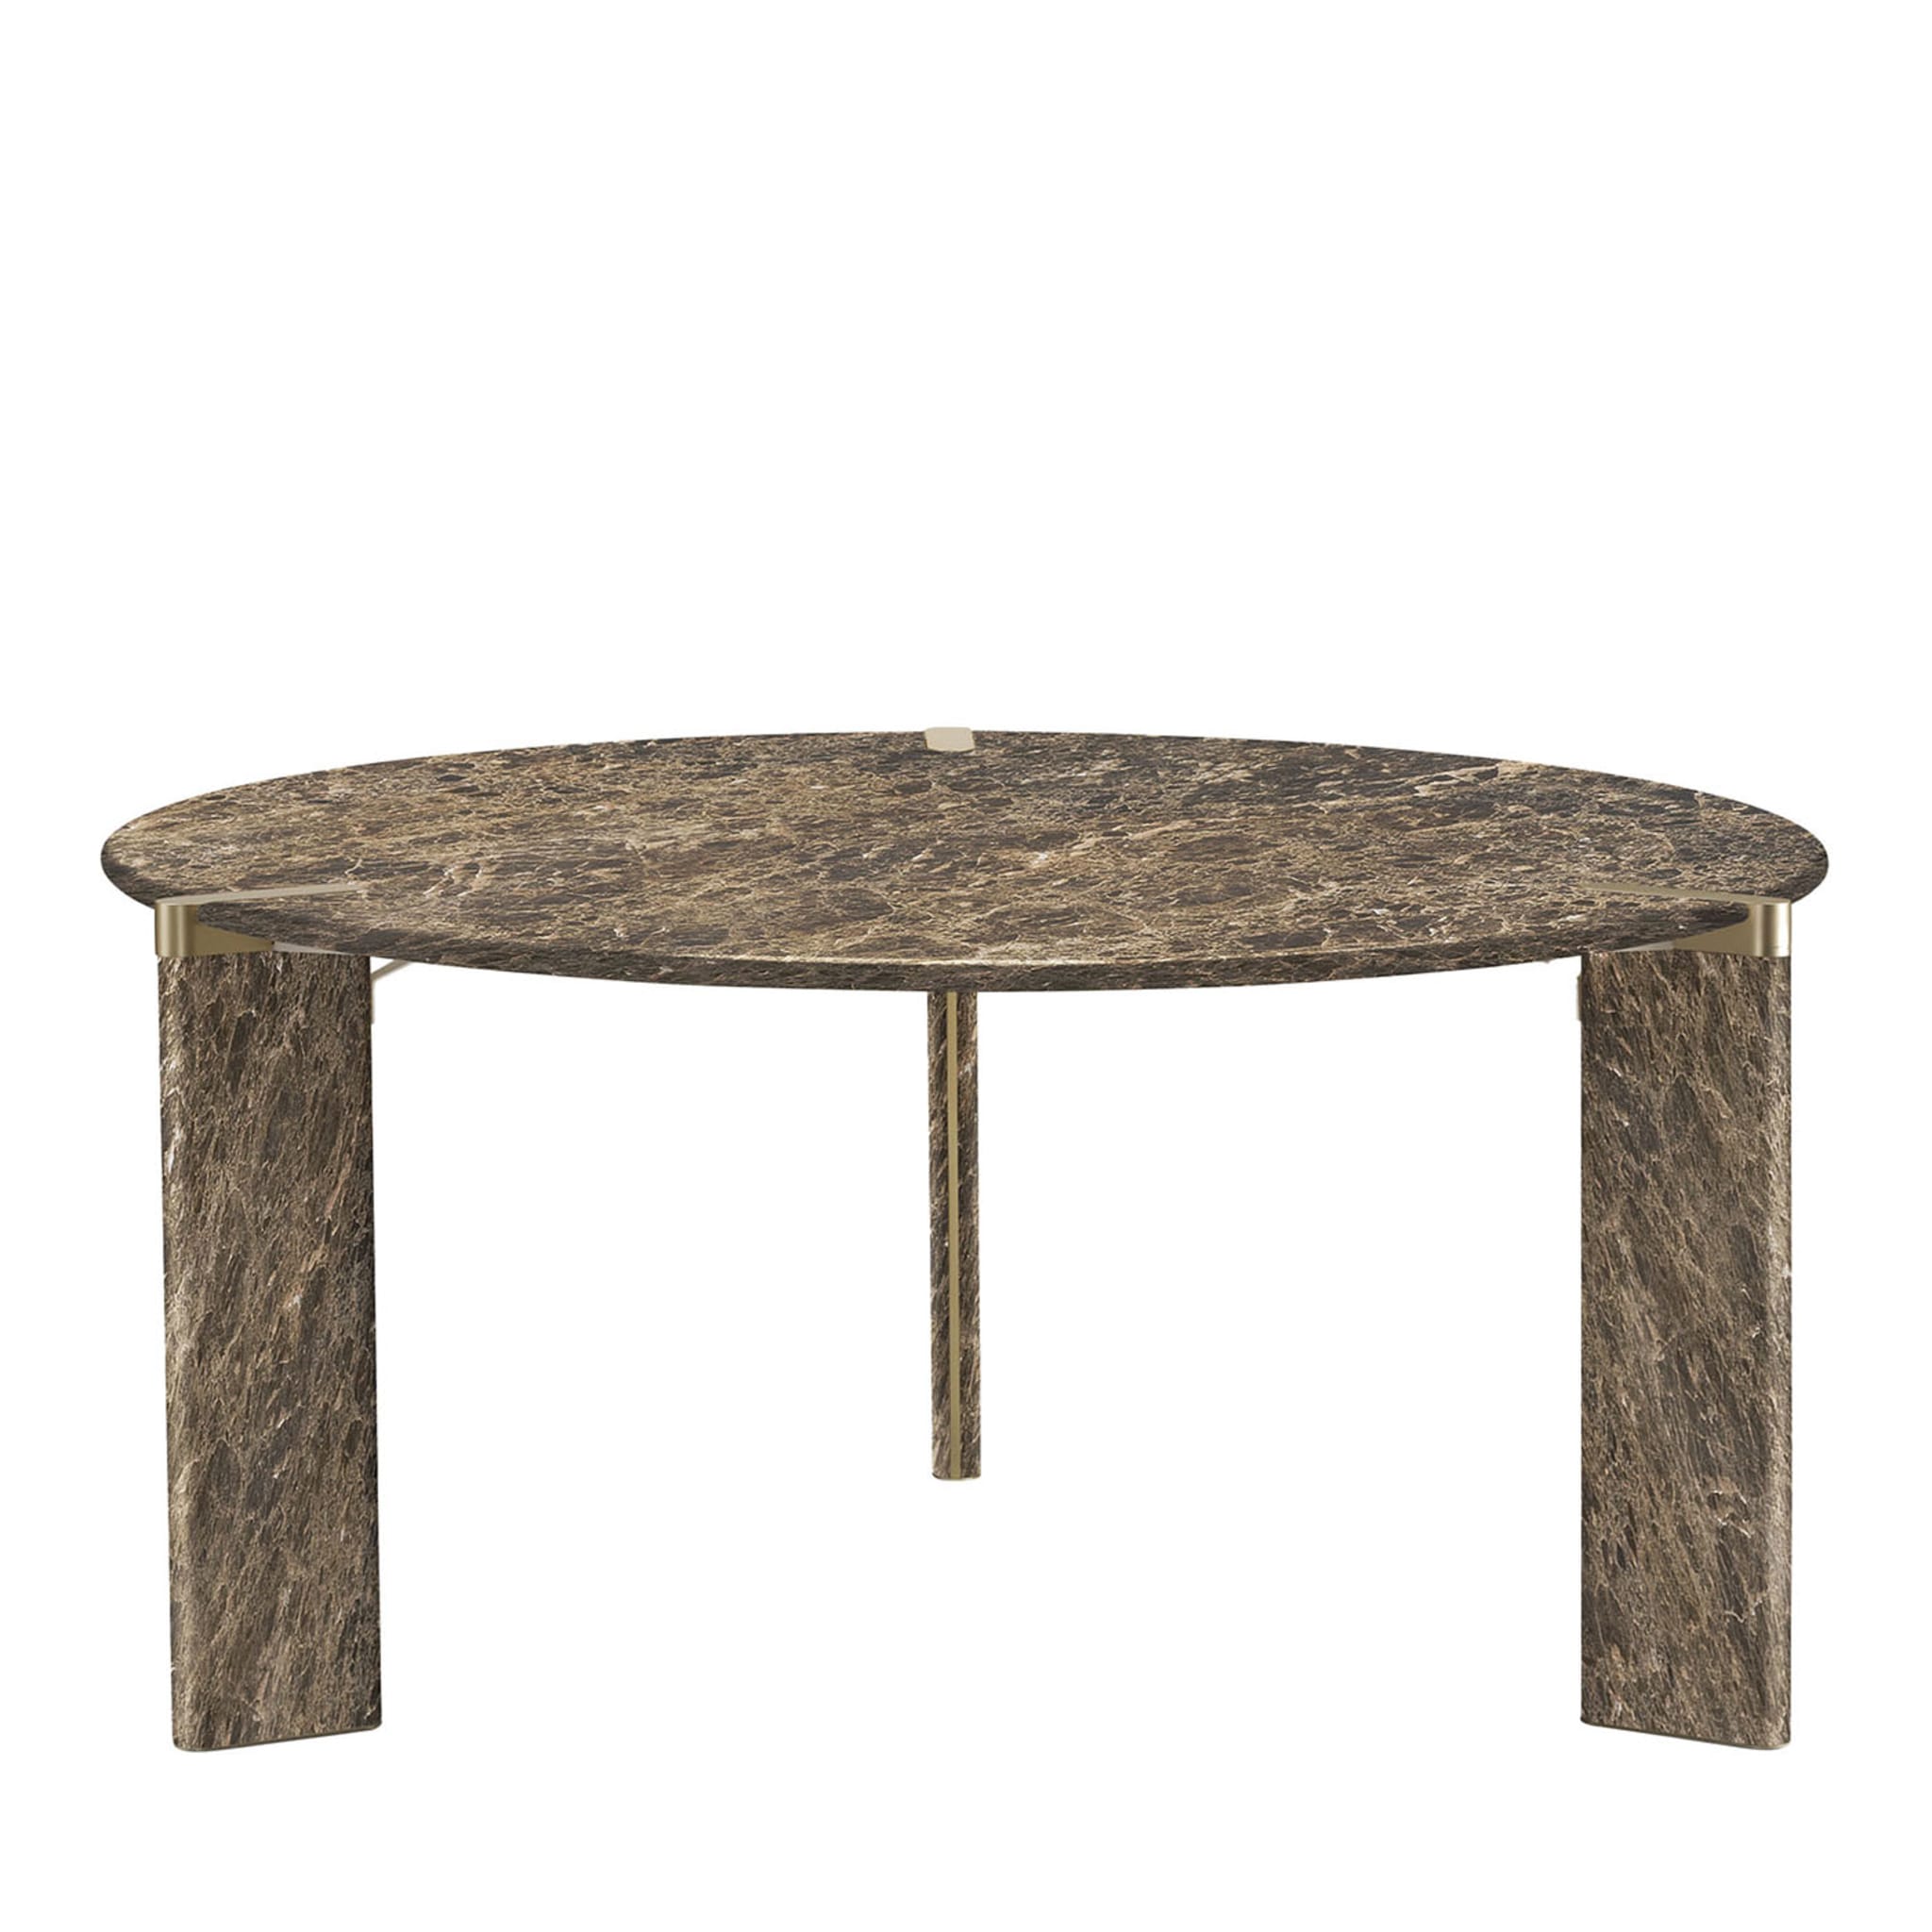 Ottanta Round Brown Dining Table by Lorenza Bozzoli - Main view